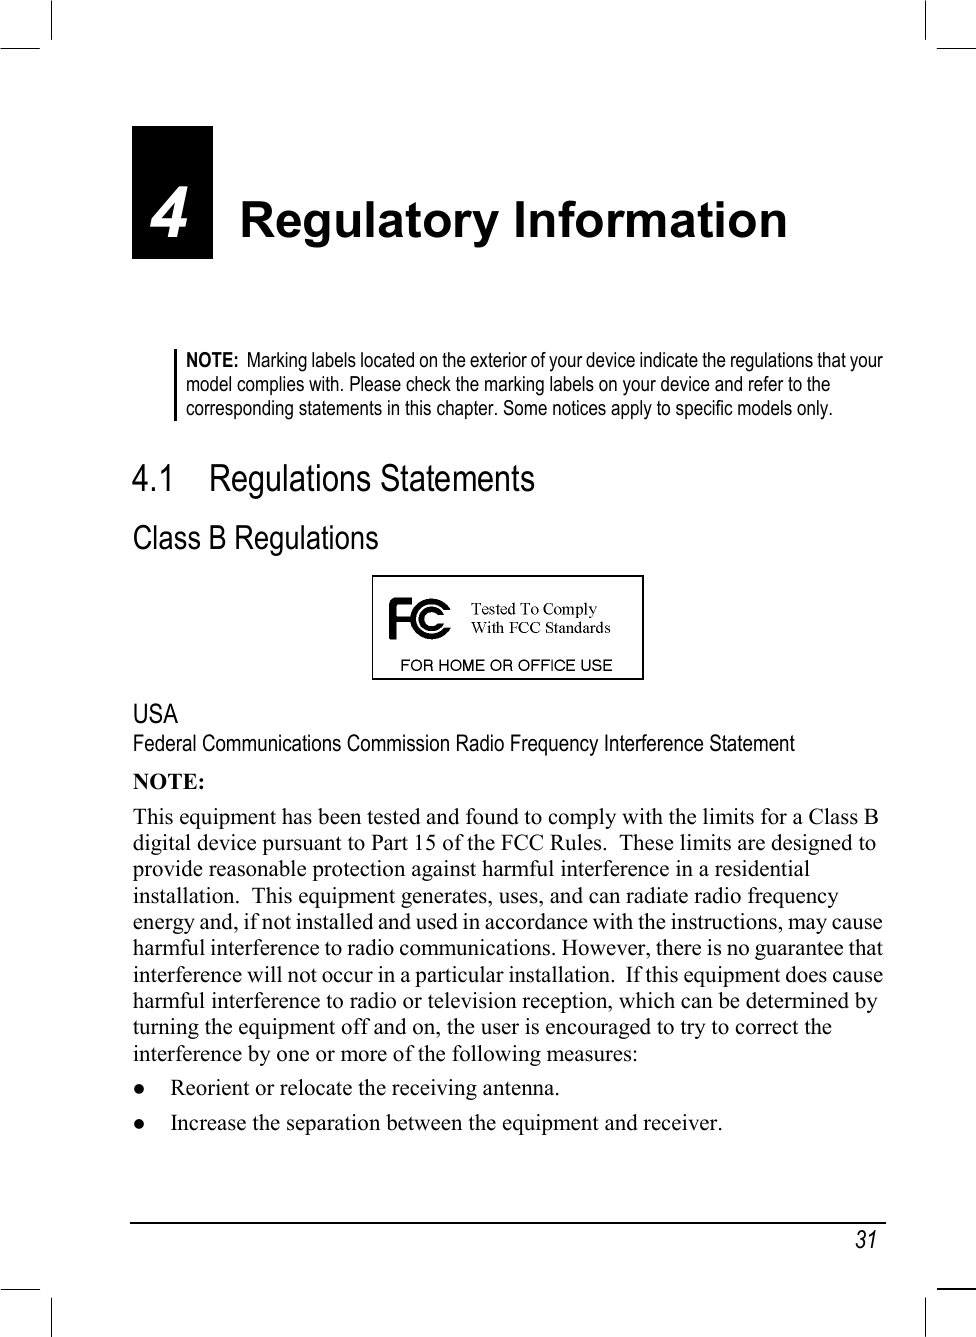   31 4  Regulatory Information NOTE:  Marking labels located on the exterior of your device indicate the regulations that your model complies with. Please check the marking labels on your device and refer to the corresponding statements in this chapter. Some notices apply to specific models only.   4.1 Regulations Statements Class B Regulations  USA Federal Communications Commission Radio Frequency Interference Statement NOTE: This equipment has been tested and found to comply with the limits for a Class B digital device pursuant to Part 15 of the FCC Rules.  These limits are designed to provide reasonable protection against harmful interference in a residential installation.  This equipment generates, uses, and can radiate radio frequency energy and, if not installed and used in accordance with the instructions, may cause harmful interference to radio communications. However, there is no guarantee that interference will not occur in a particular installation.  If this equipment does cause harmful interference to radio or television reception, which can be determined by turning the equipment off and on, the user is encouraged to try to correct the interference by one or more of the following measures:   Reorient or relocate the receiving antenna.   Increase the separation between the equipment and receiver. 